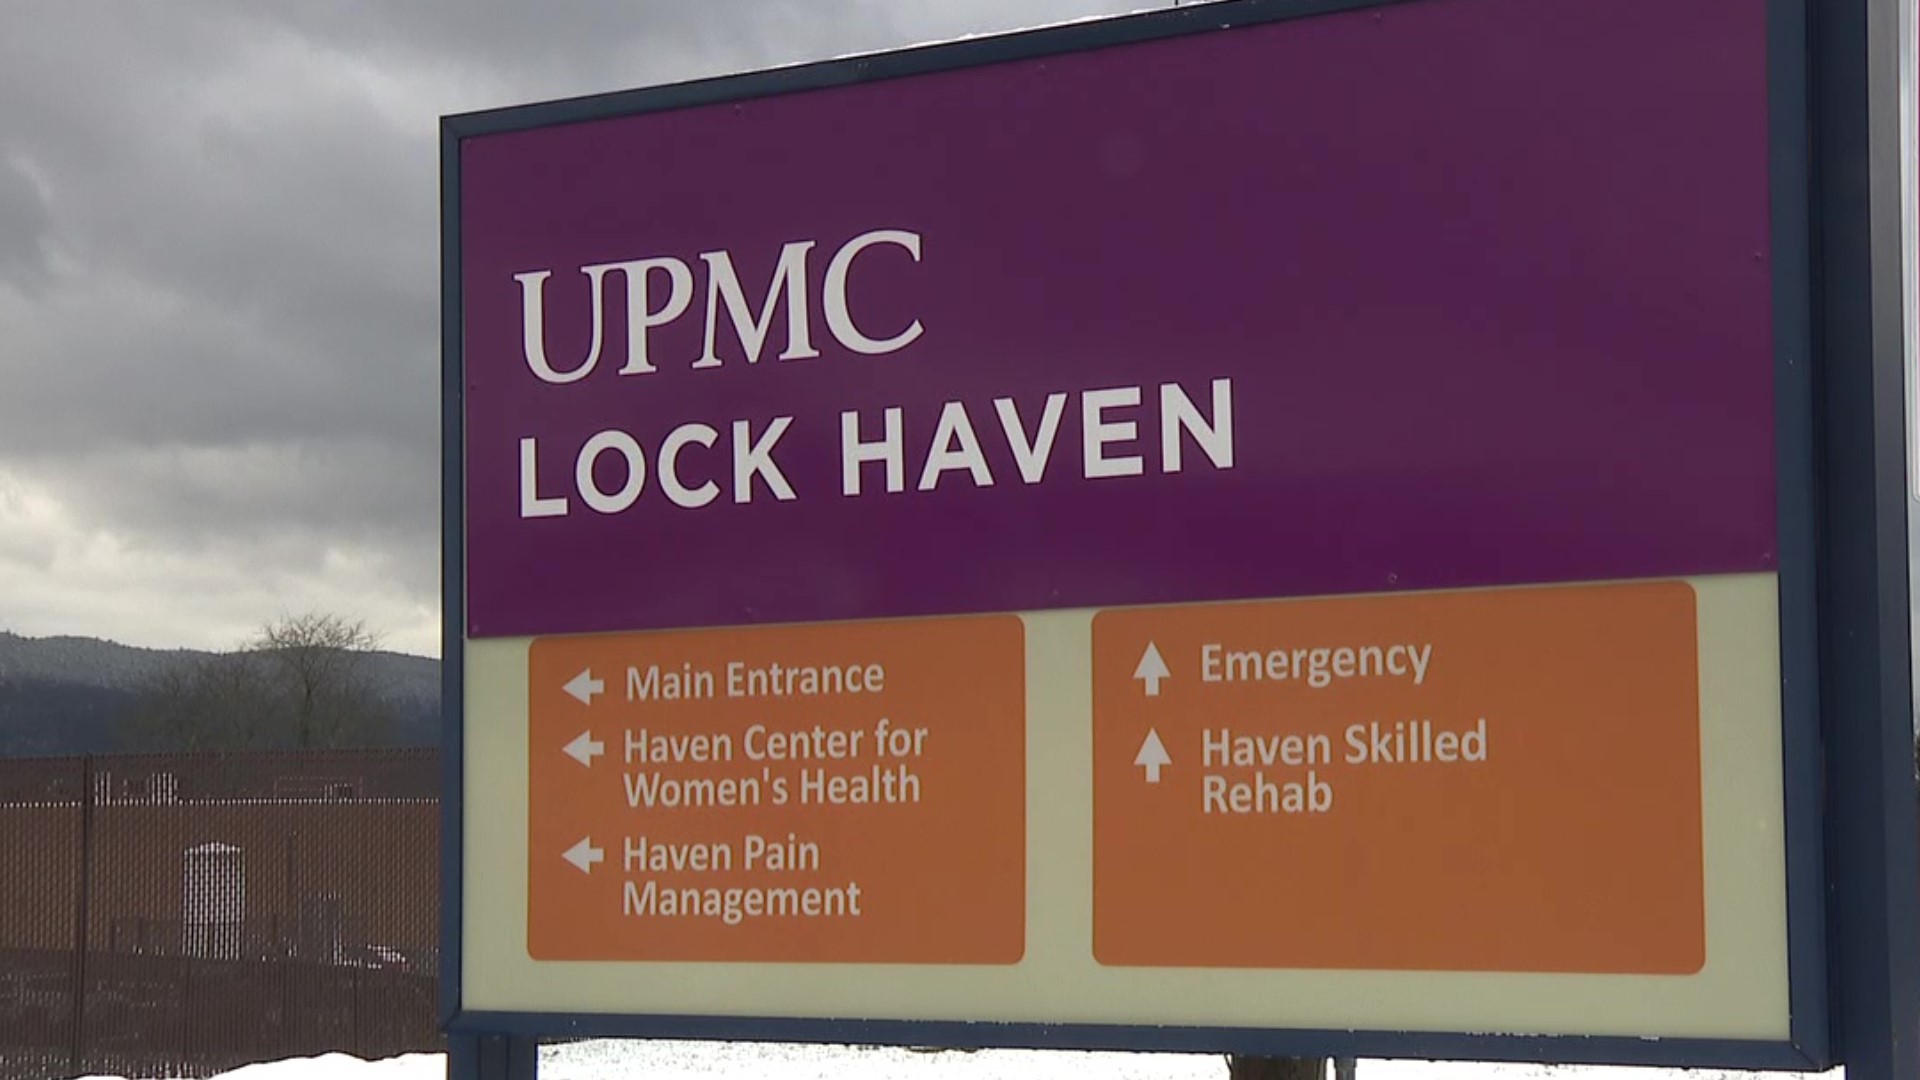 UPMC Lock Haven announced last week that it will be moving forward with plans to transition to an outpatient emergency department only.